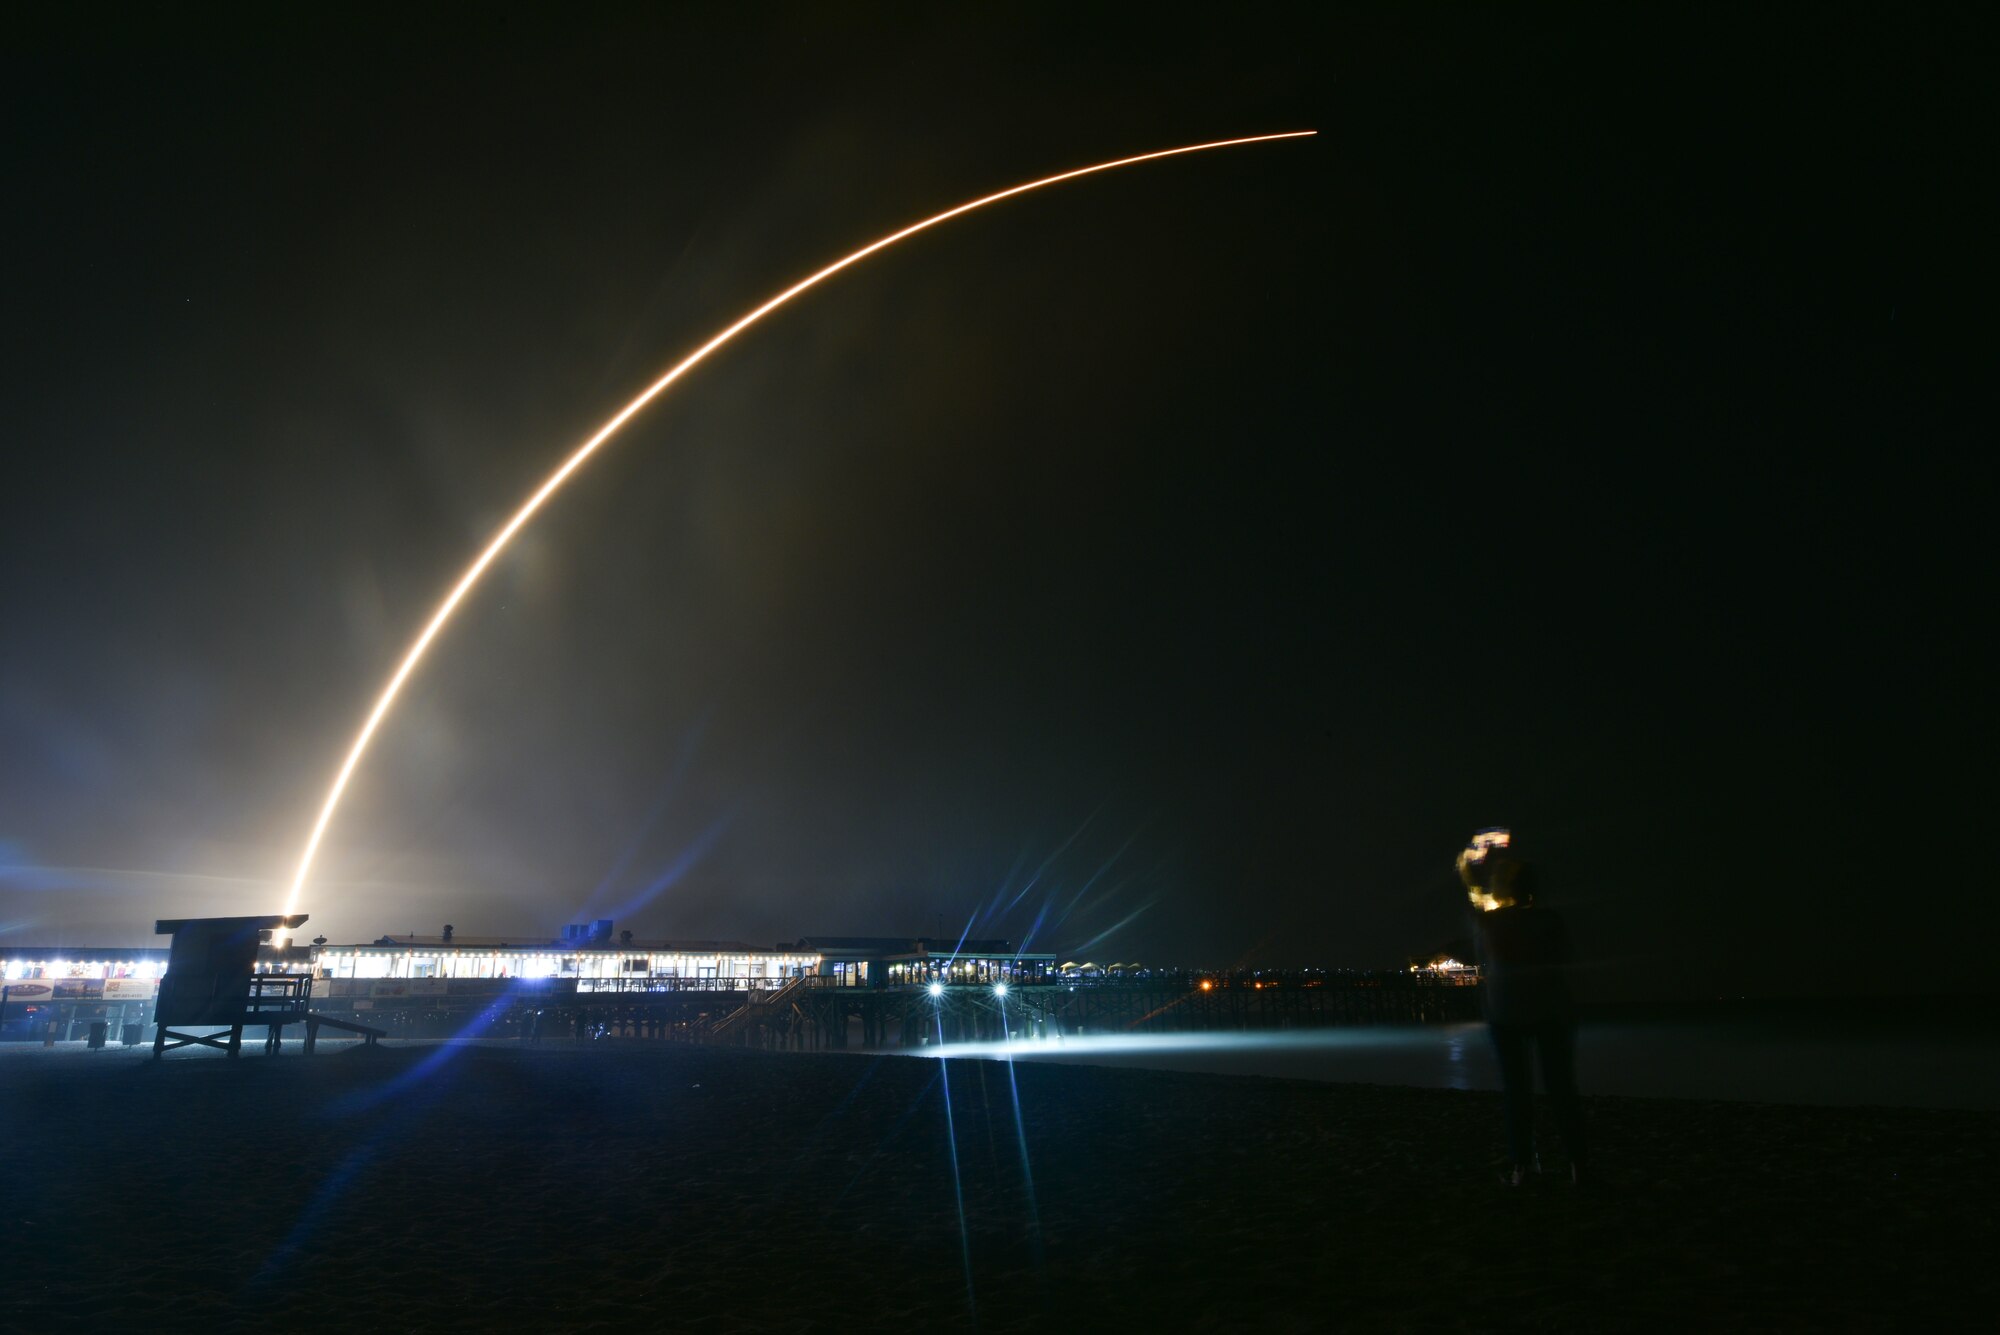 SpaceX’s Falcon 9 rocket PSN VI launches from Cape Canaveral Air Force Station